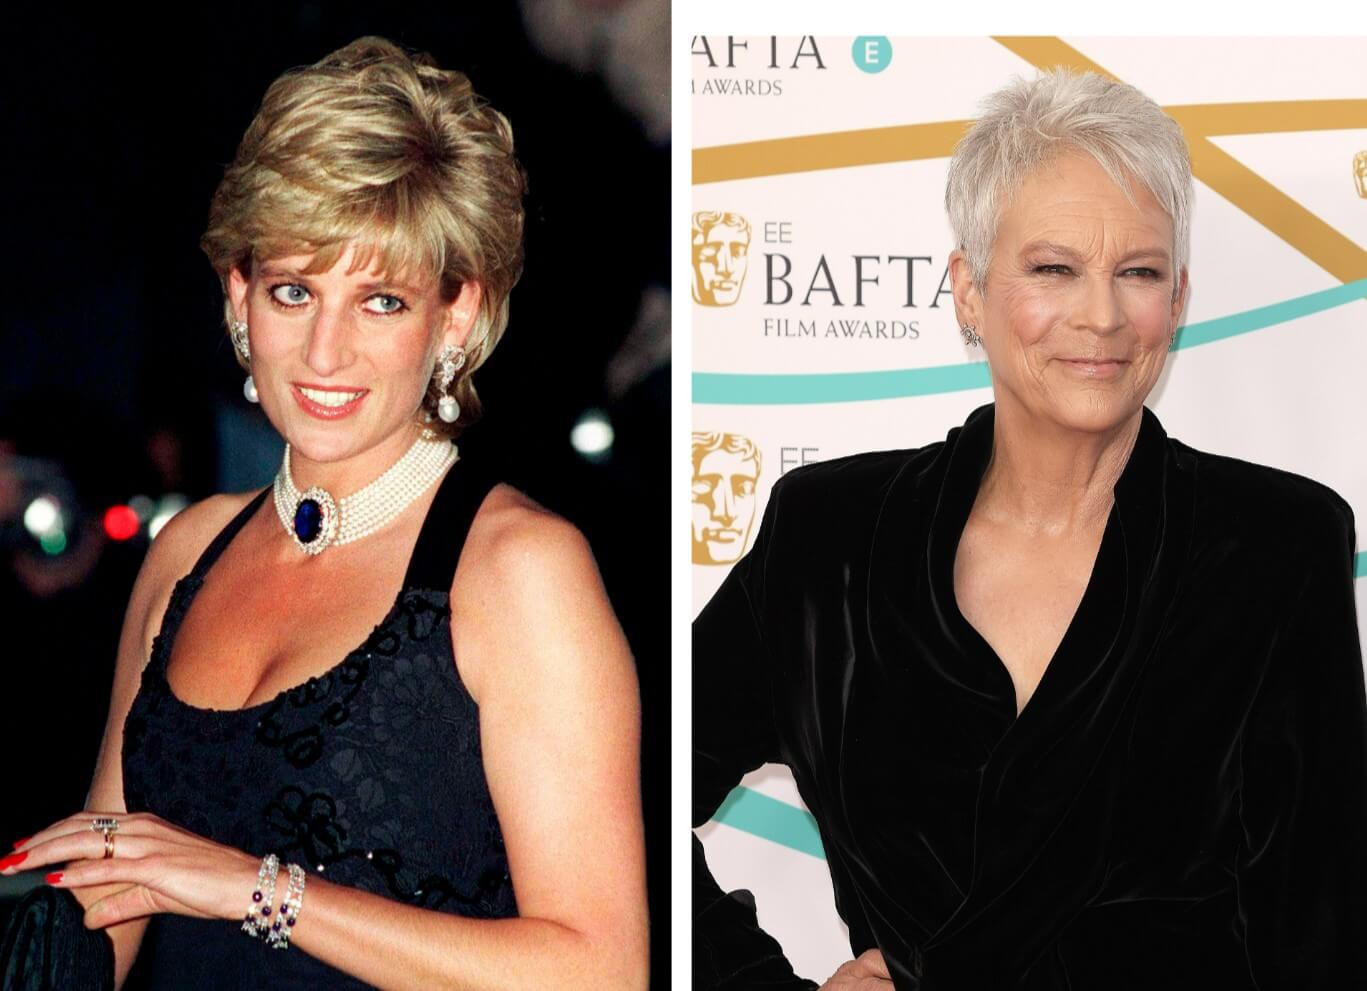 (L) Princess Diana at a cancer research gala in London, (R) Jamie Lee Curtis at the BAFTAs in London